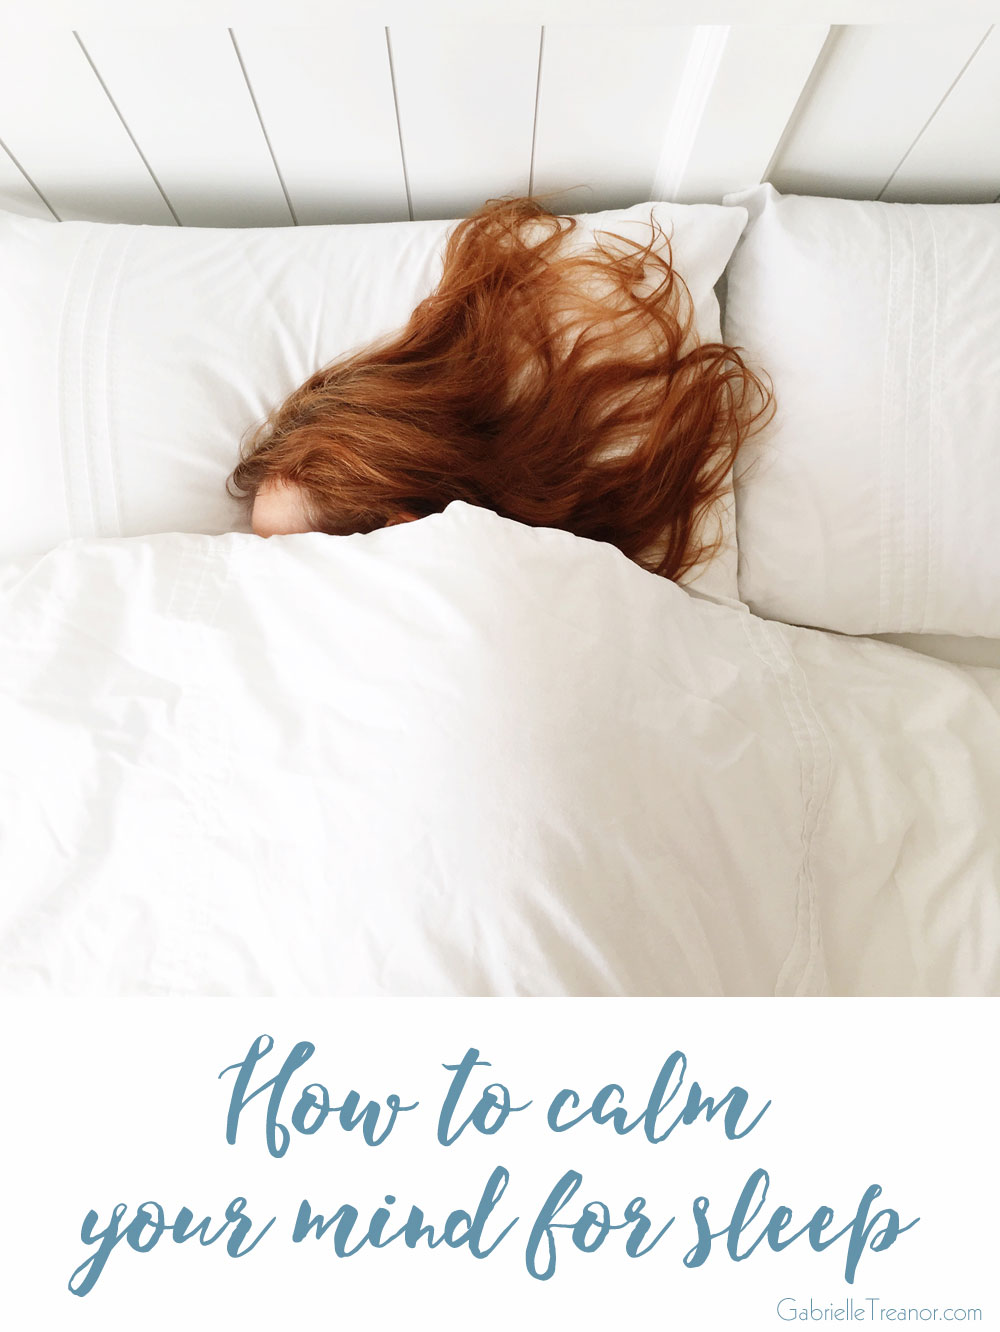 How to calm your mind for sleep so you get a better quality night's sleep